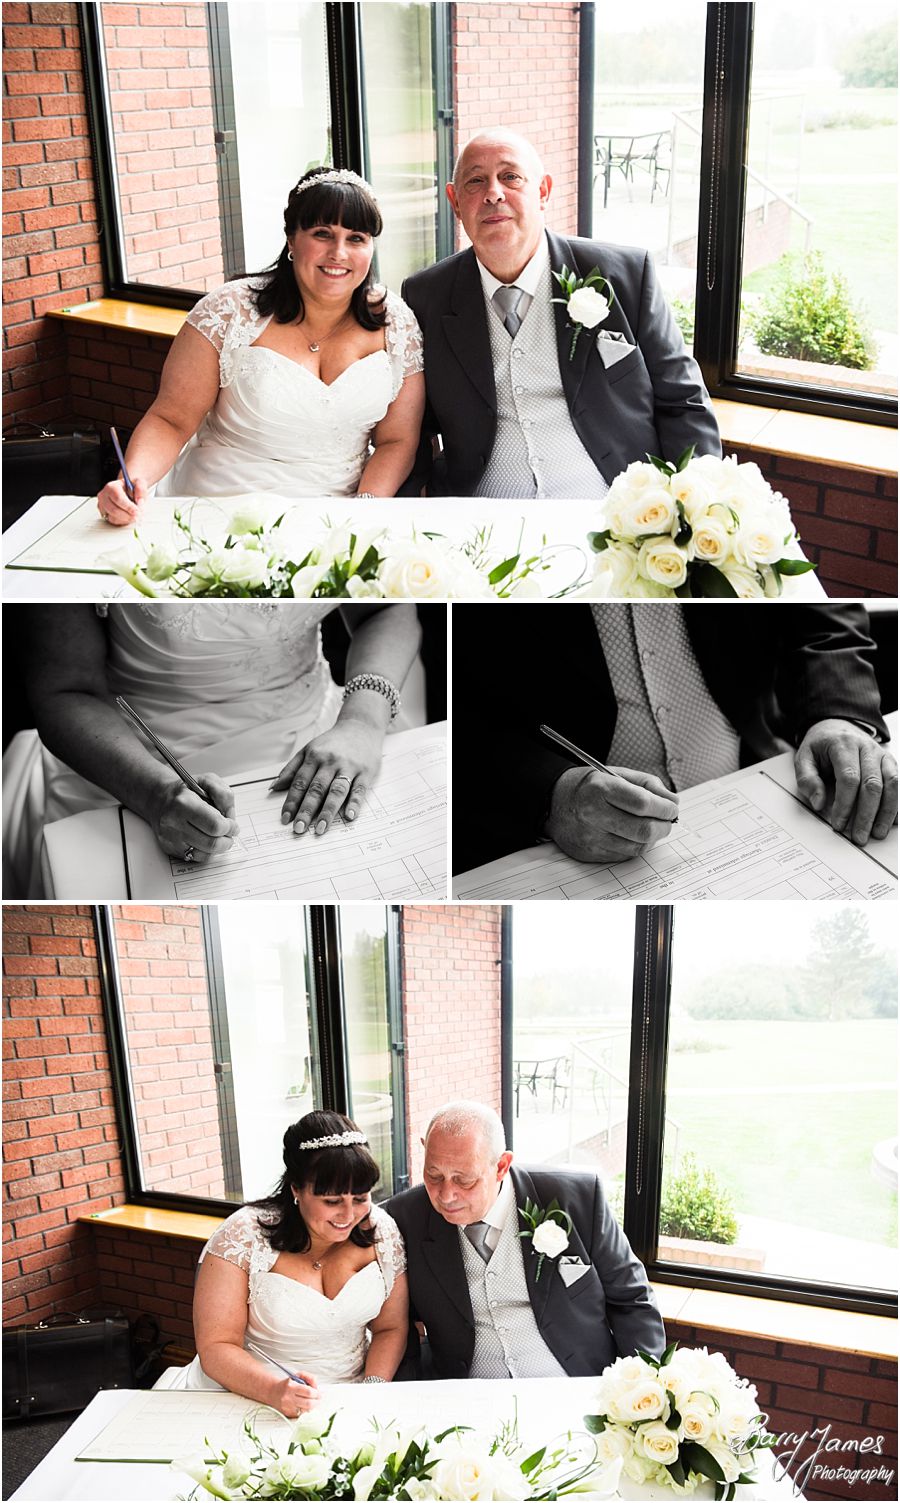 Creative contemporary wedding photographs at Calderfields Golf and Country Club in Walsall by Walsall Wedding Photographer Barry James